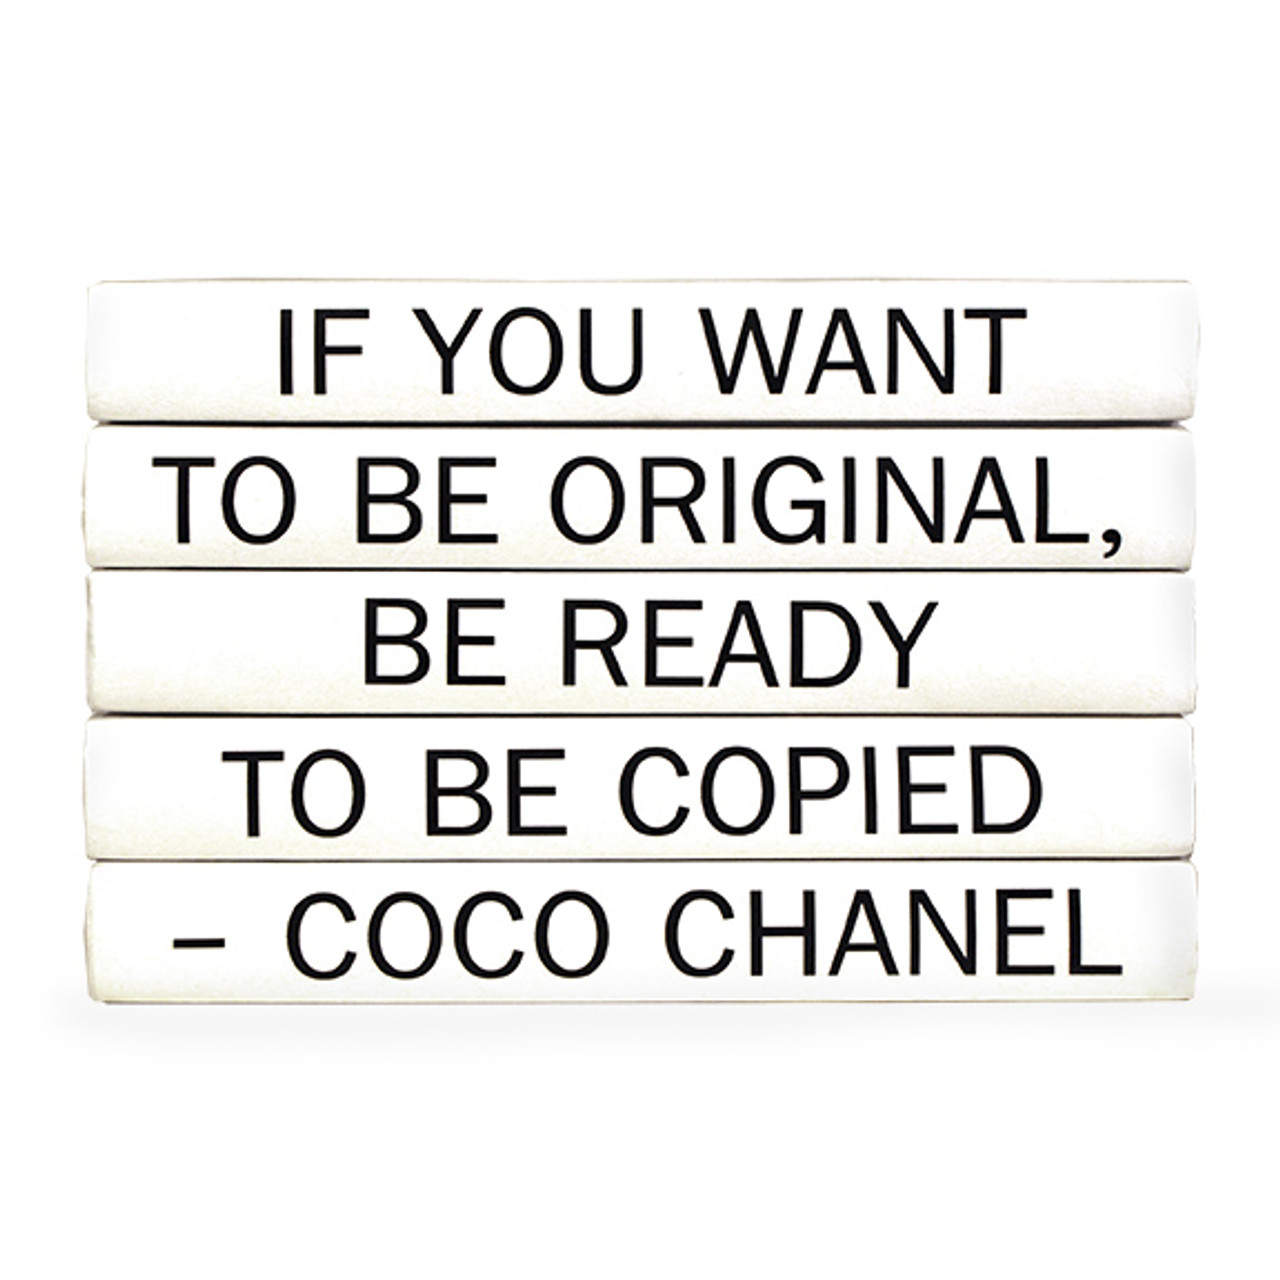 5 Vol. Coco Chanel If you want to be Quote/ Black Covers / 9.5 wide /  Approx. 6.25 tall